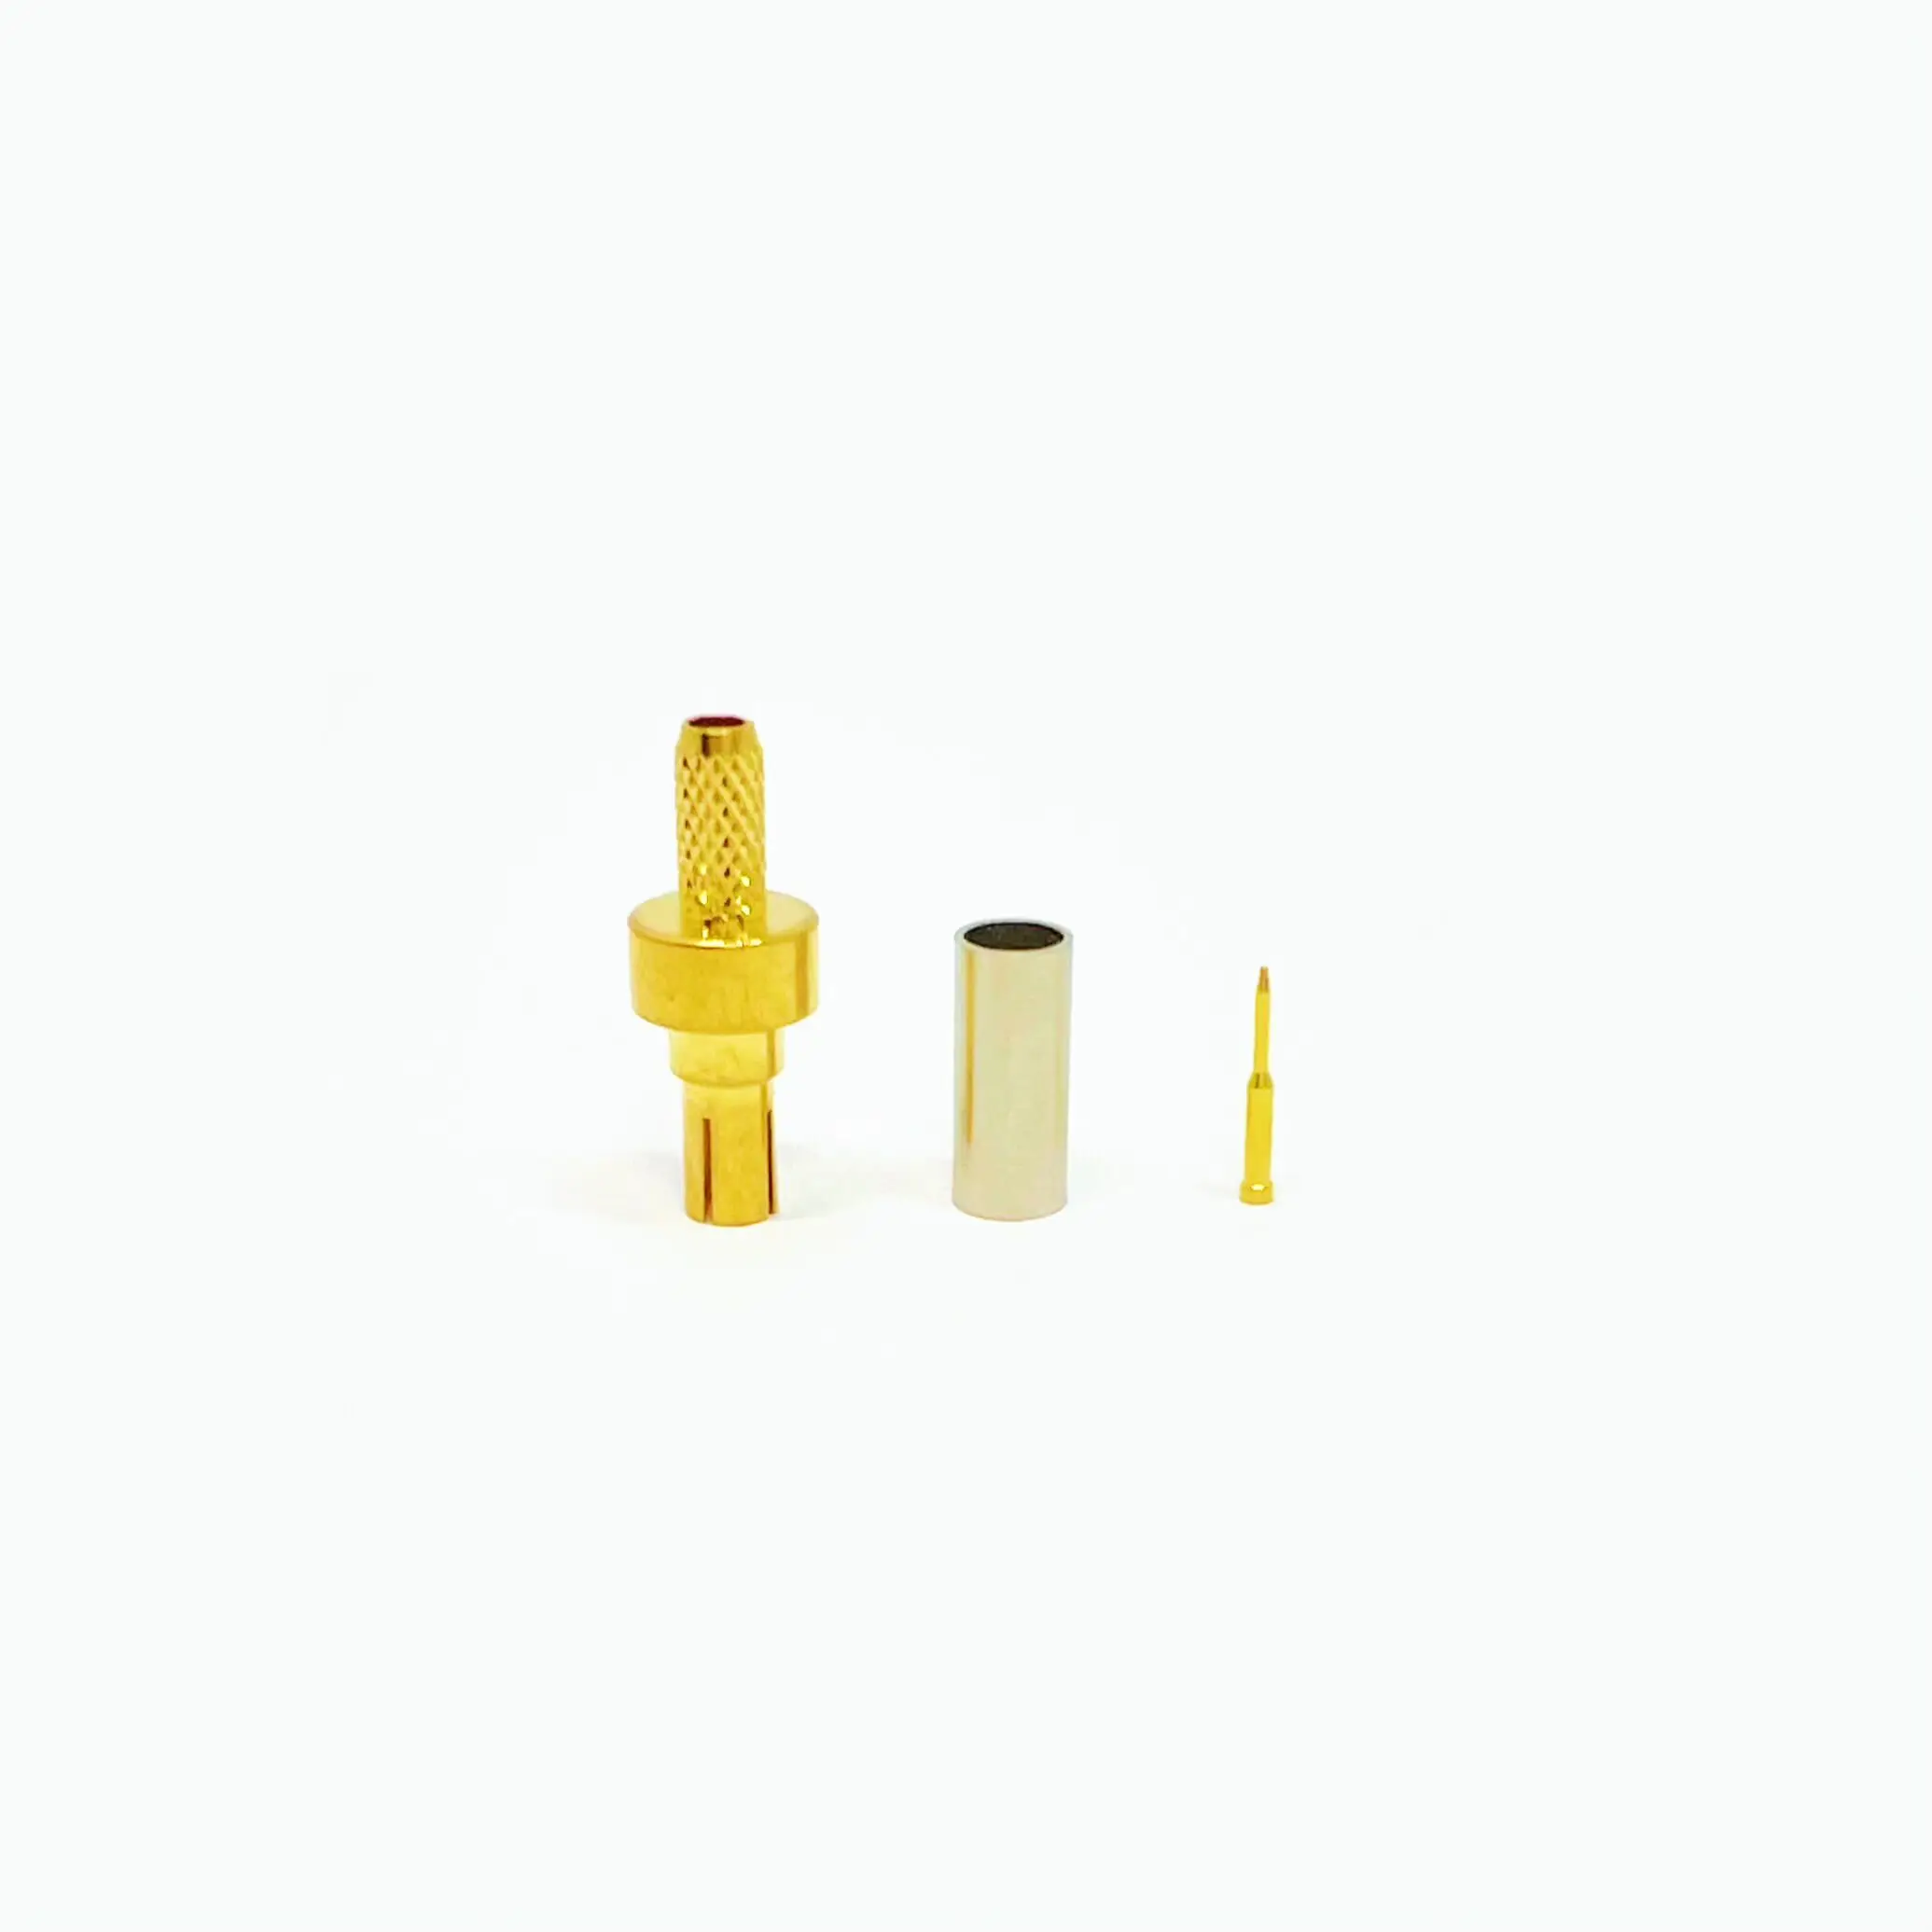 Gold plated RF TS9 male plug for rg316 rg174 lmr100 cable straight rf coaxial connector manufacture